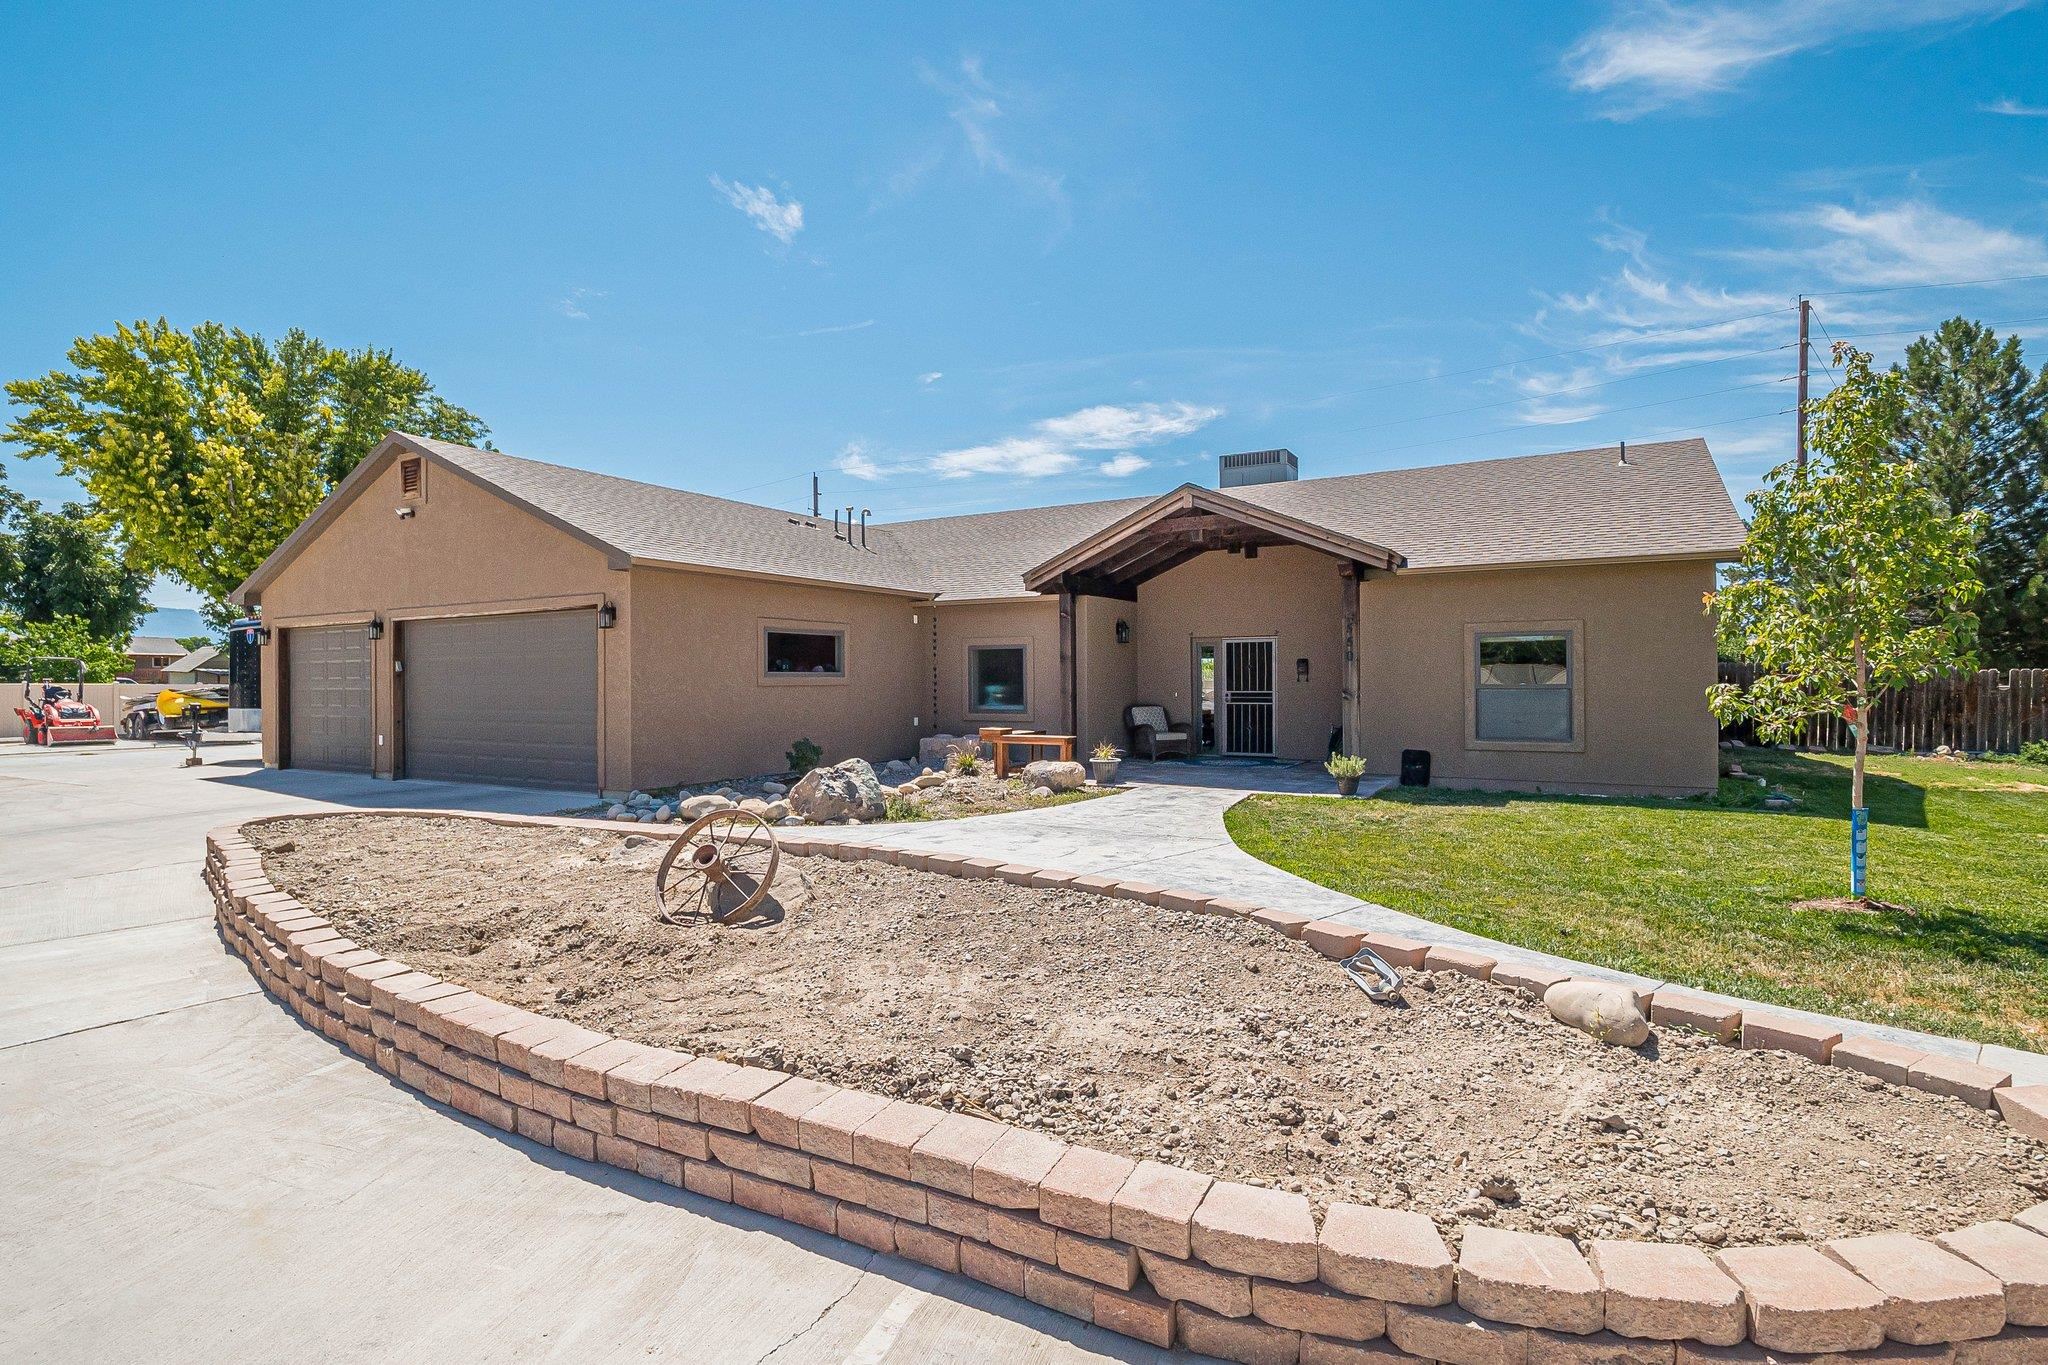 550 30 Road, Grand Junction, CO 81504